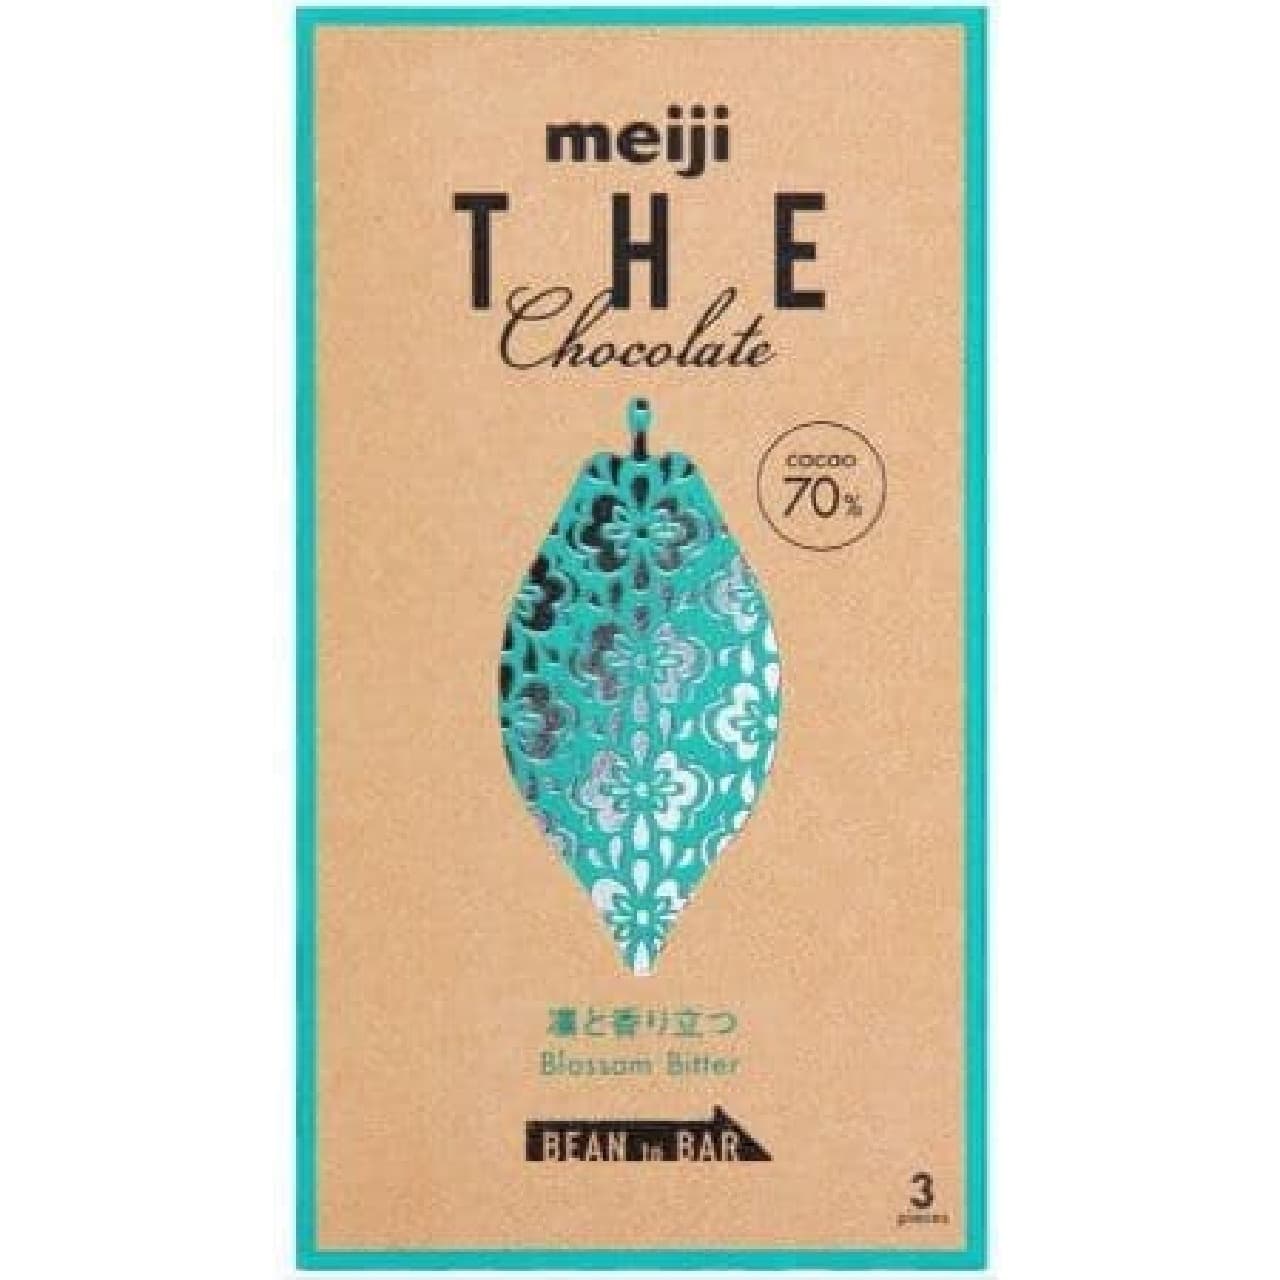 From the "Meiji The Chocolate" series, the new work "Rin and Fragrant Blossom Bitter"